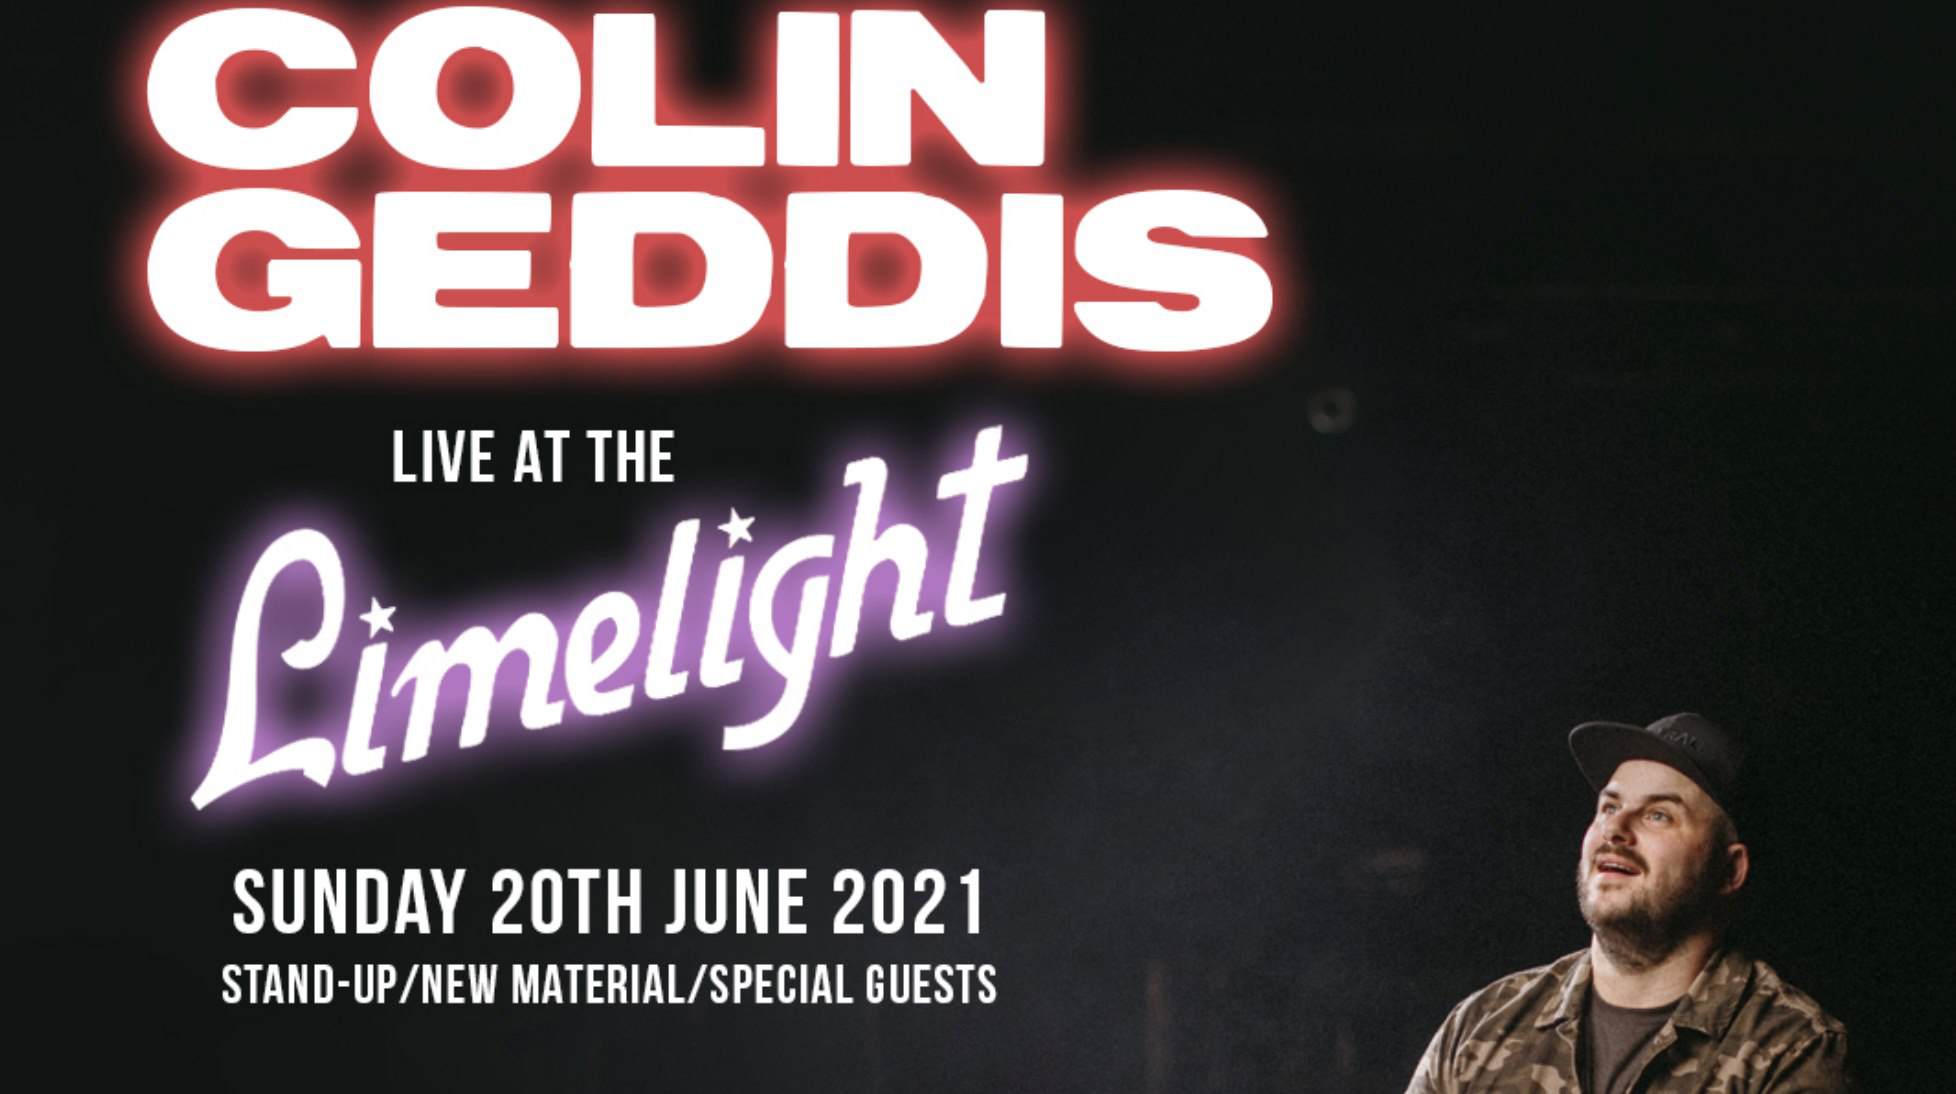 COLIN GEDDIS announces 'Live at the Limelight' - Sunday 20th June 2021 